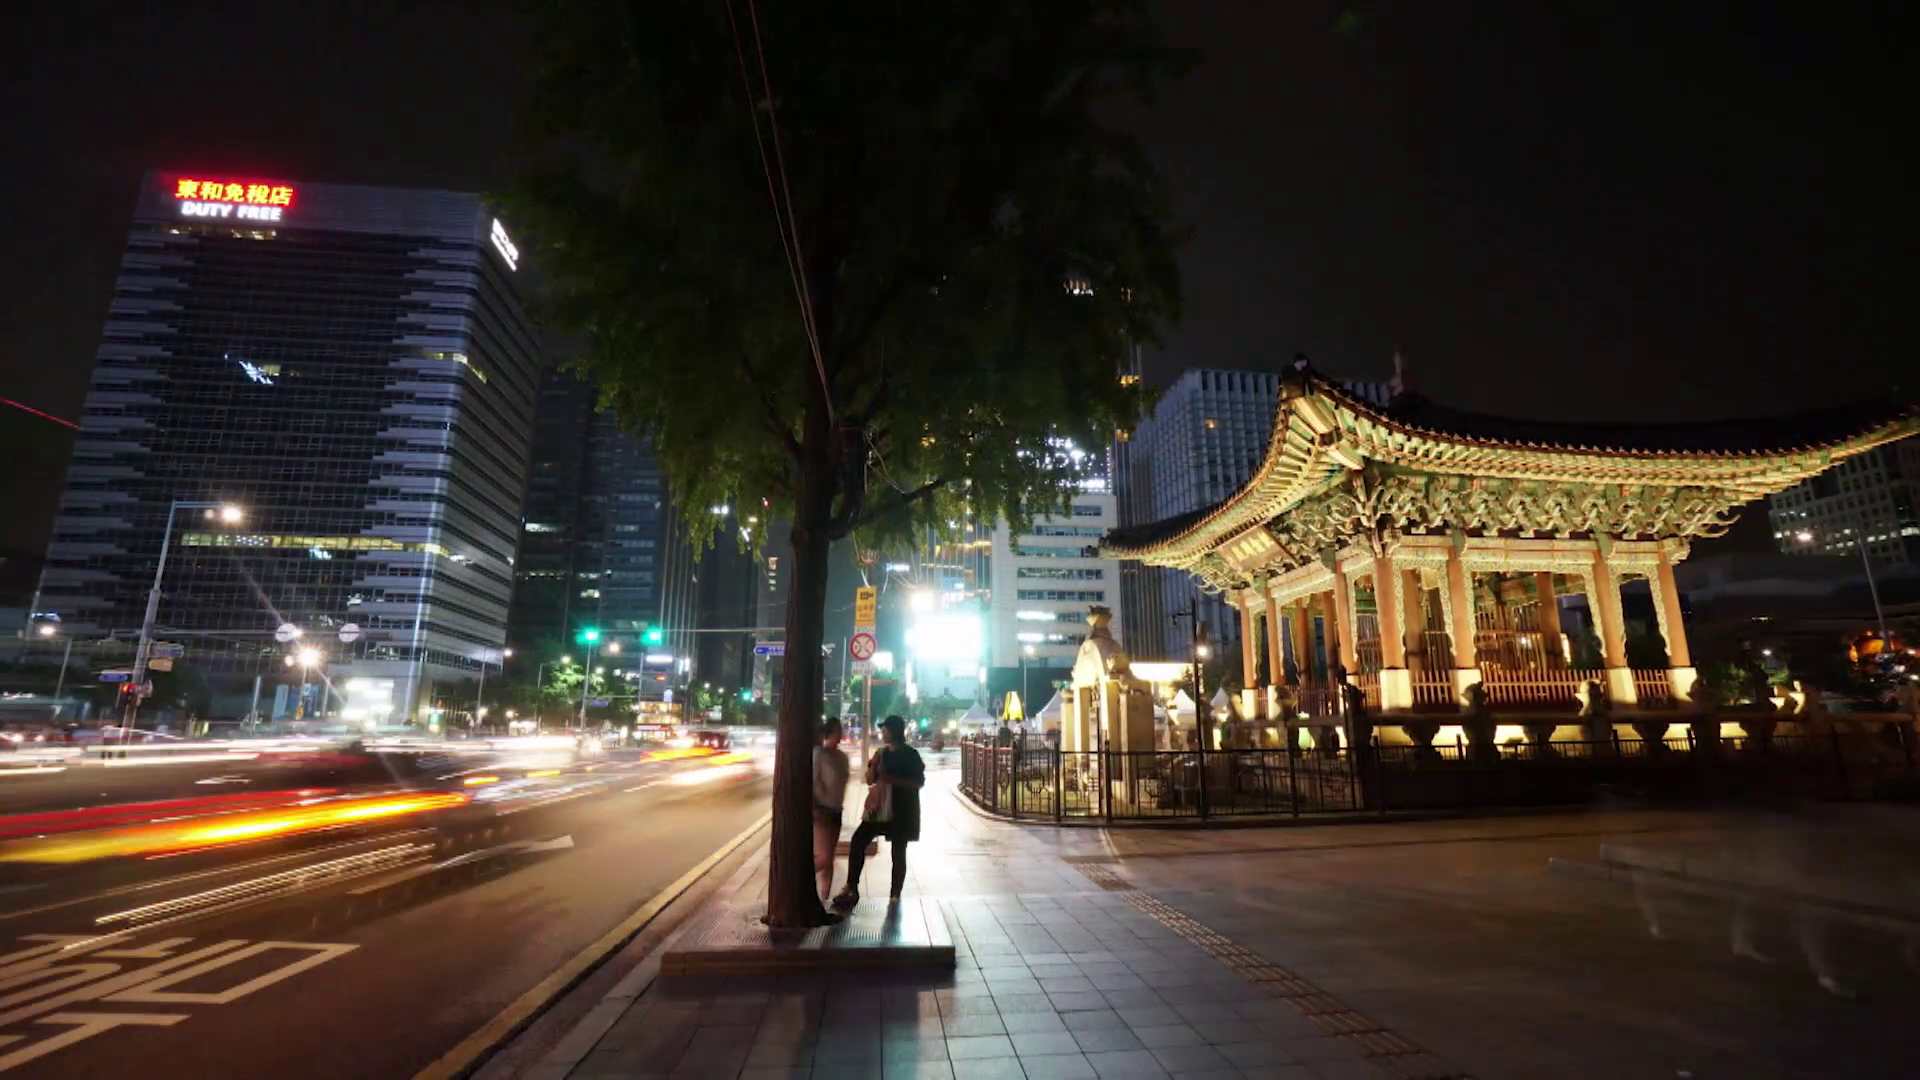 Scott Swan takes you to South Korea, the host country of the 2018 Winter Olympic Games. Scott explores the sights, people and history of South Korea.